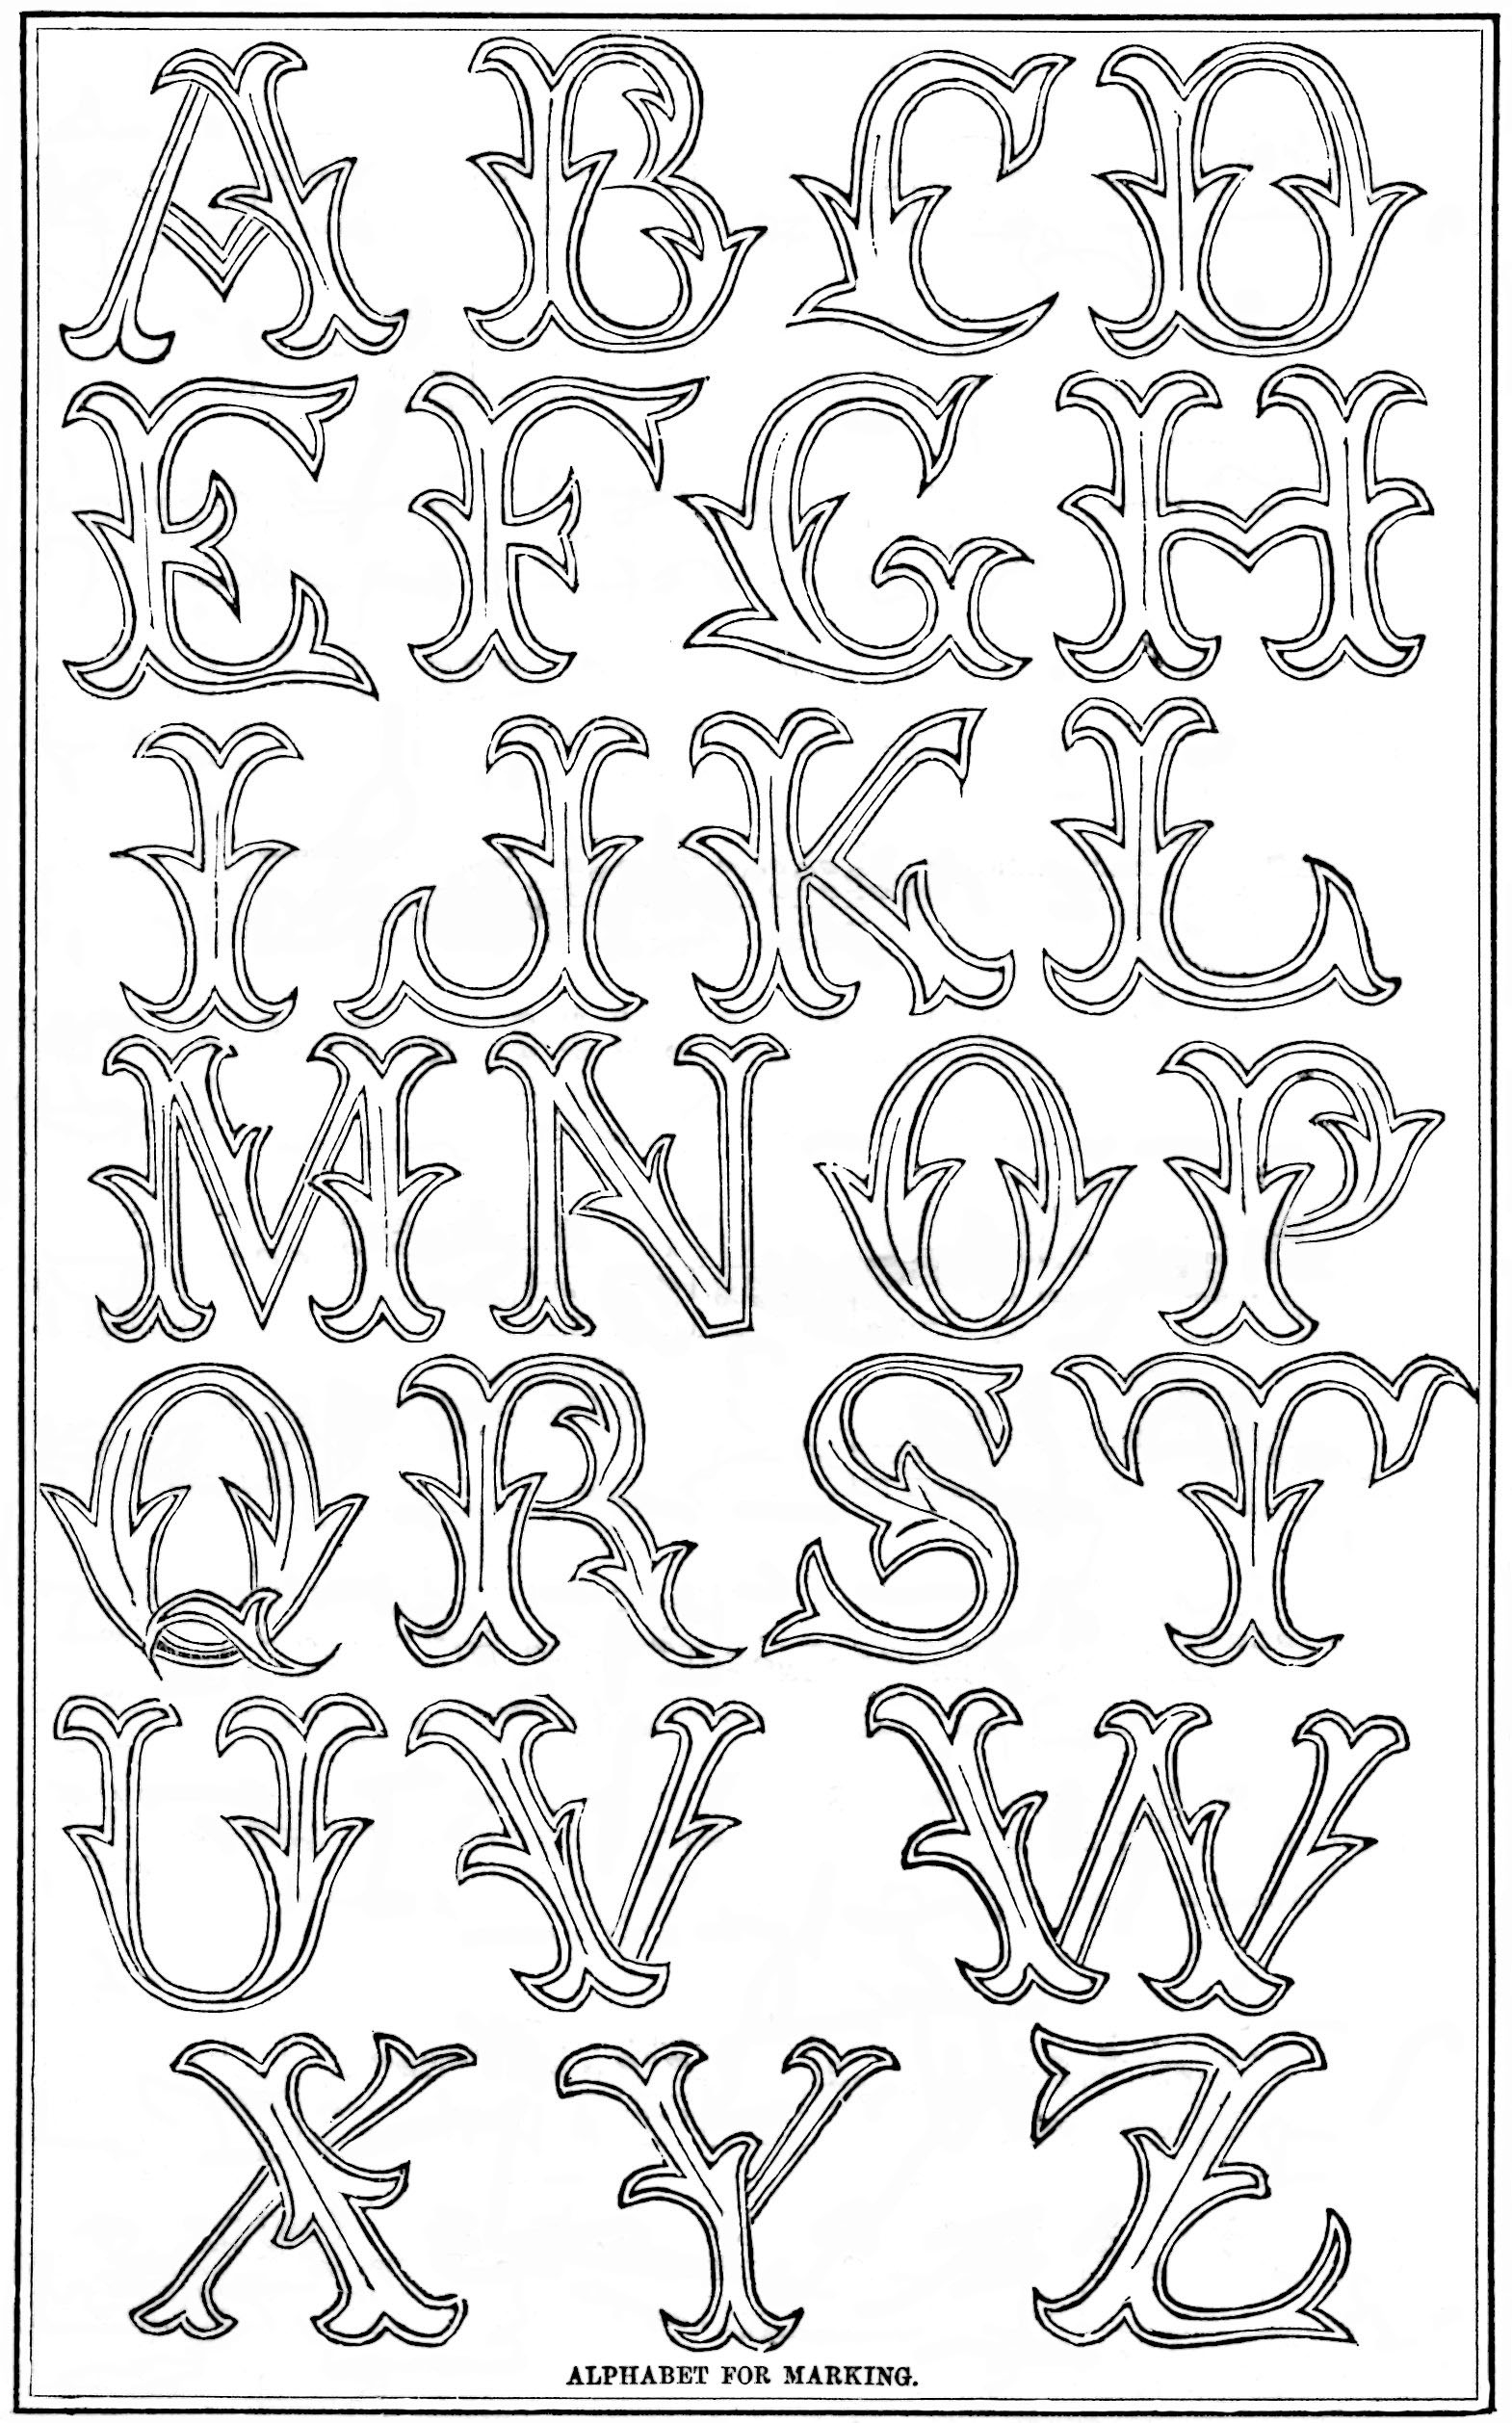 Hand Embroidery Alphabet Patterns Fancy Antique Alphabet Patterns For Embroidery Monograms Vintage